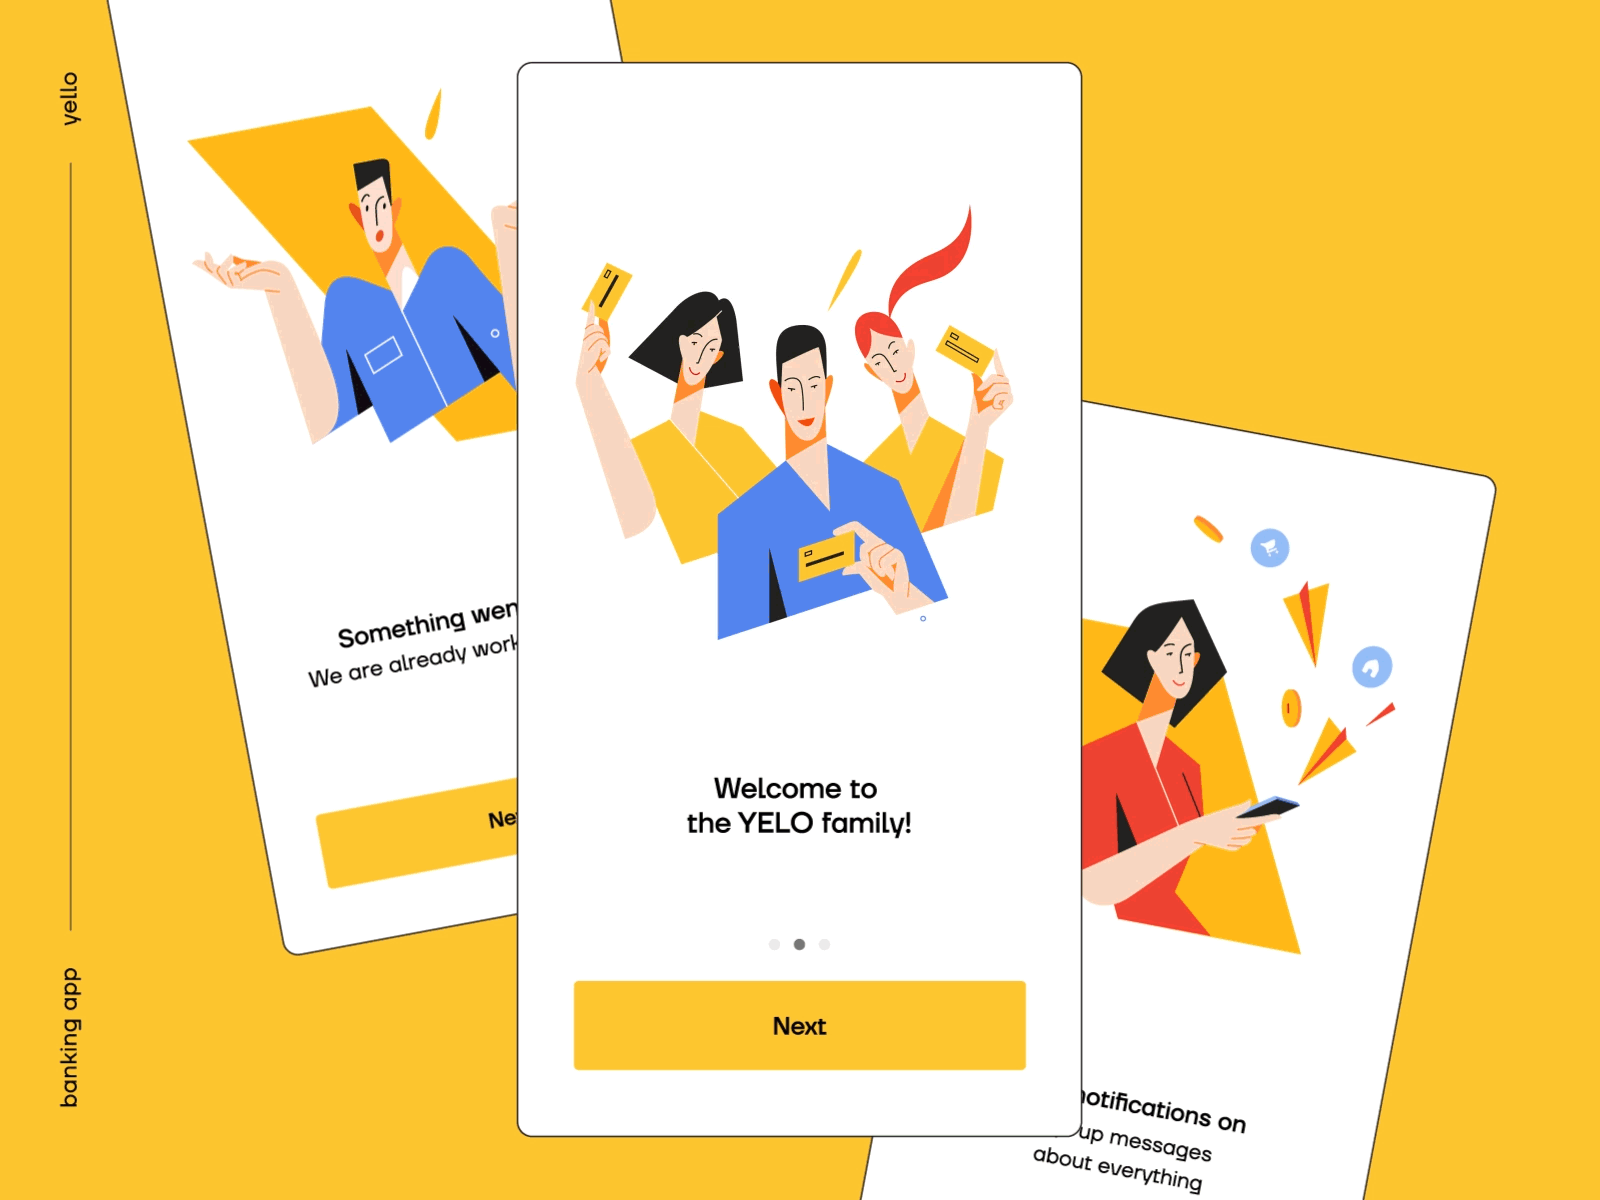 Family Bank Card - Illustrations & animations (JSON, Lottie) 2fa app design application bank account bank card family funds illustration json lottie lottiefiles money onboarding